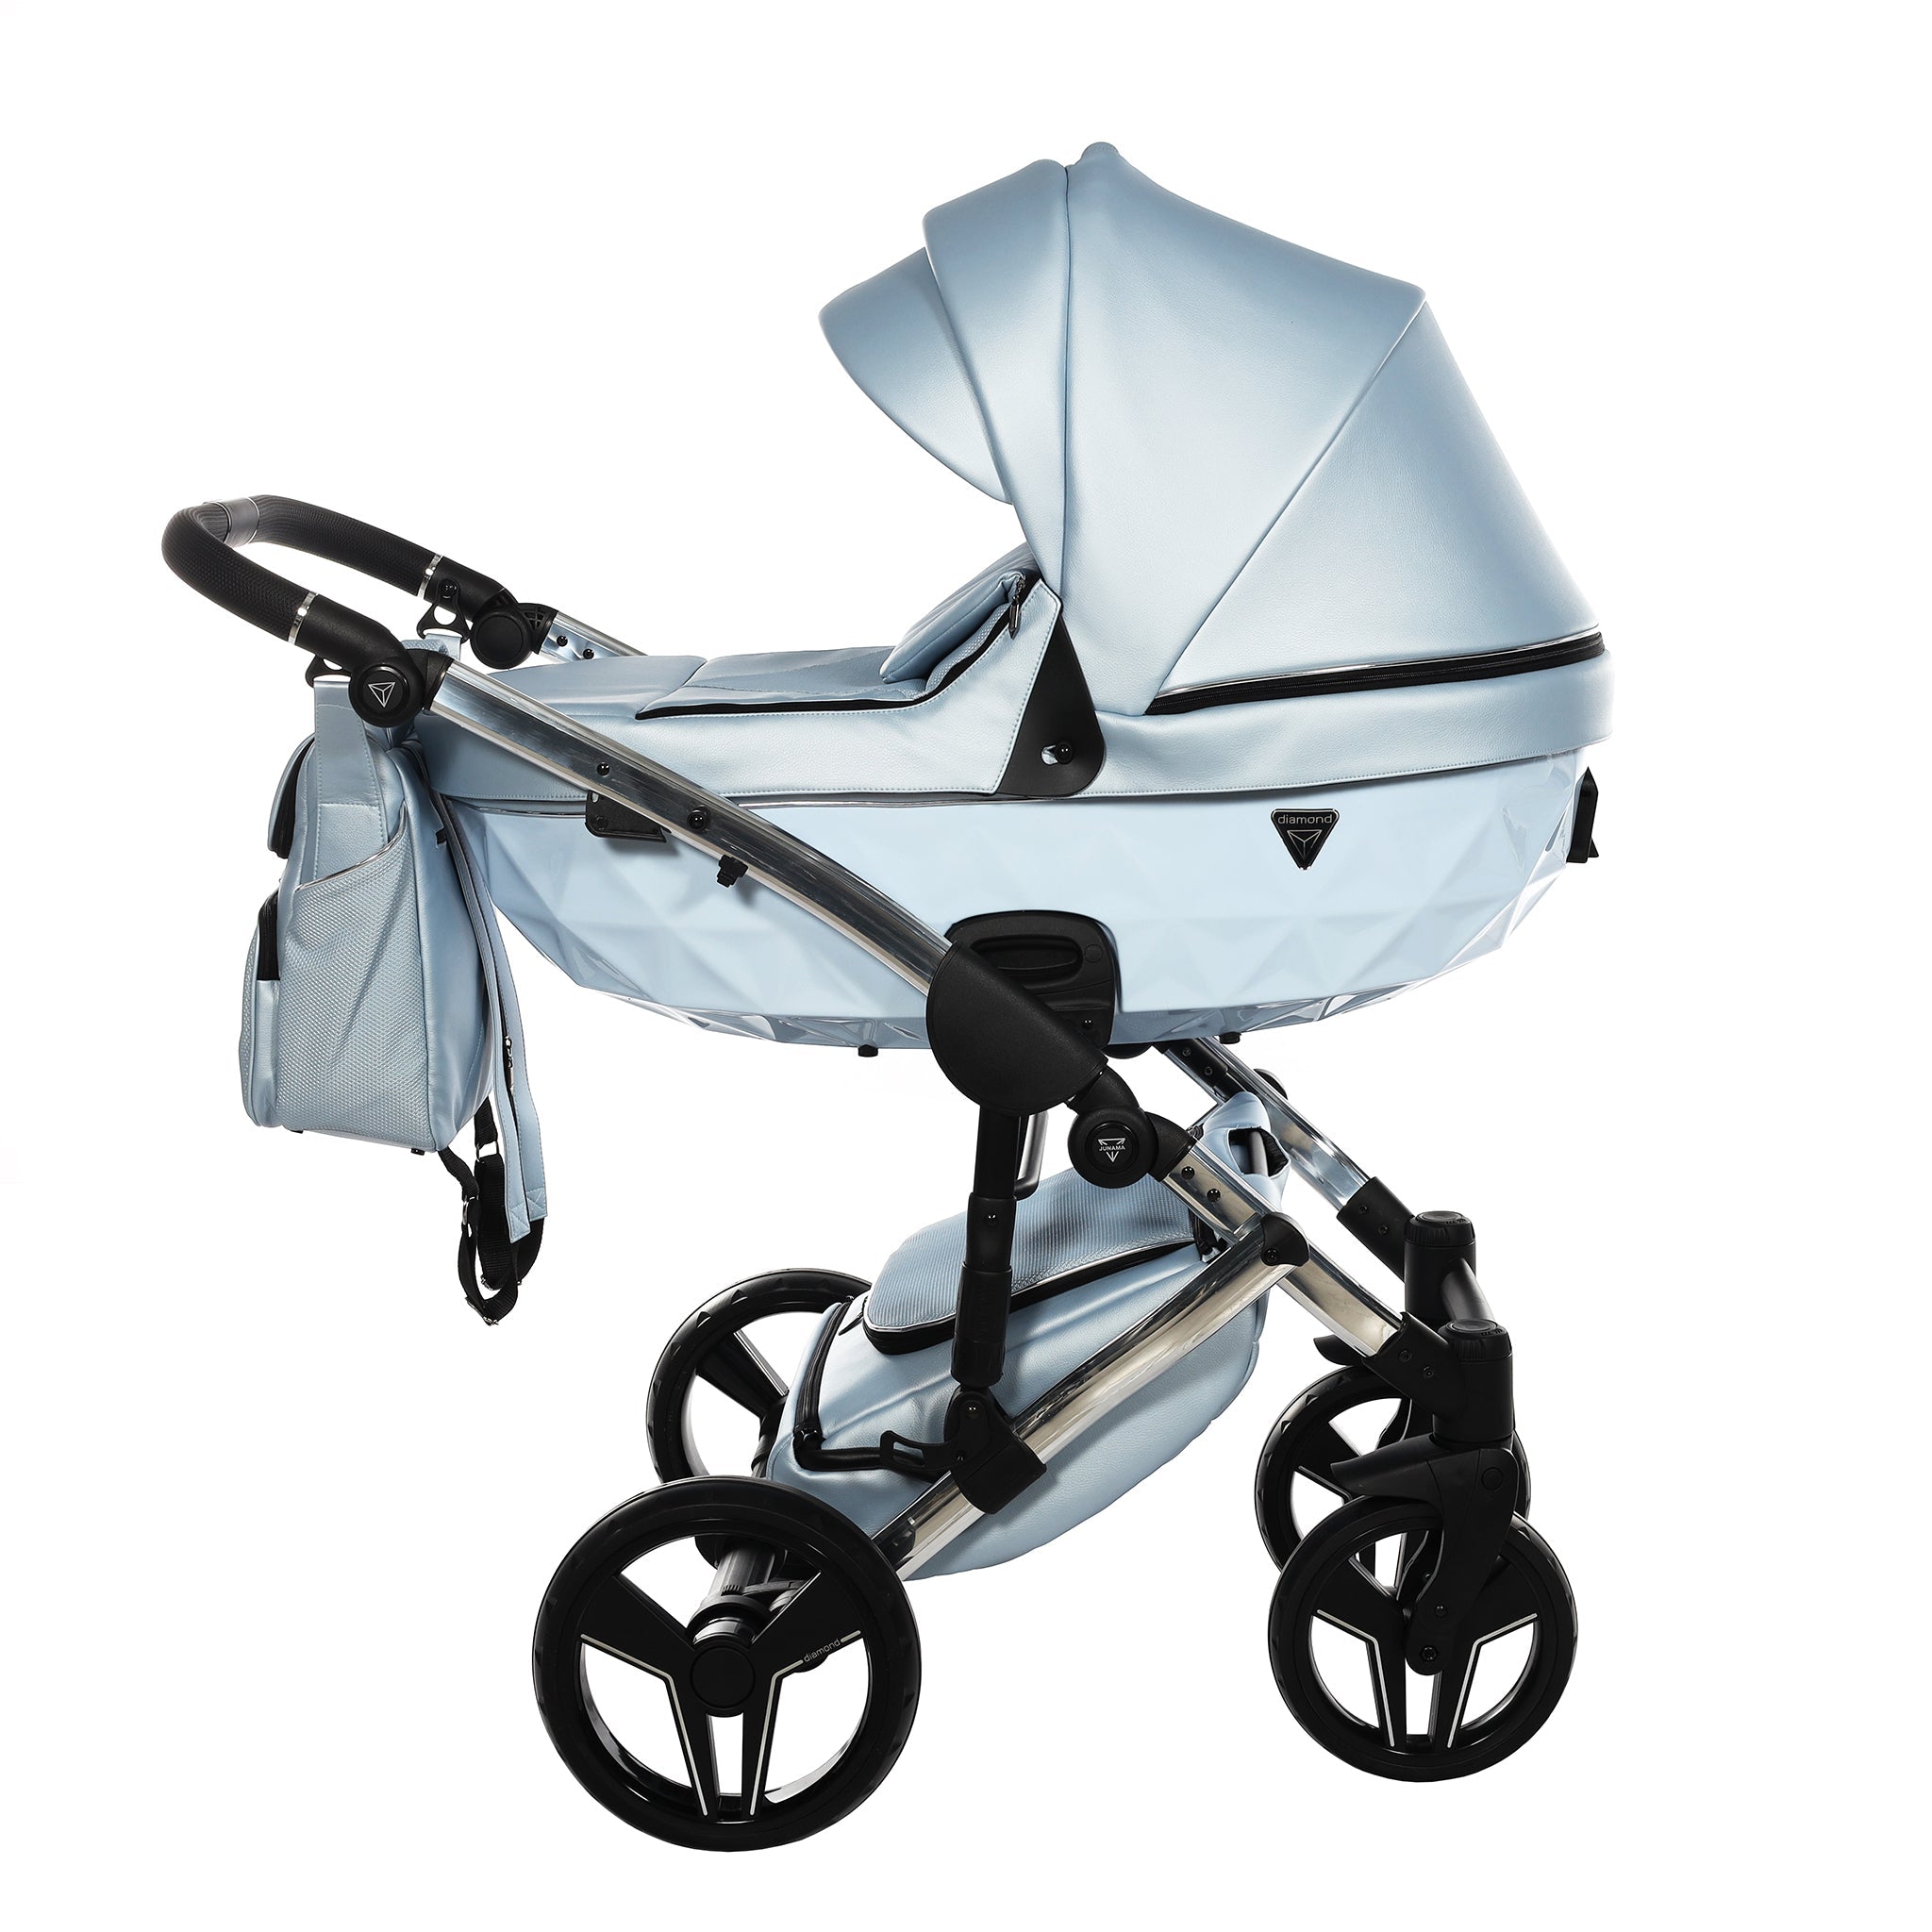 Junama S Class, baby prams or stroller 2 in 1 - Baby blue and Silver, Code number: JUNSC010